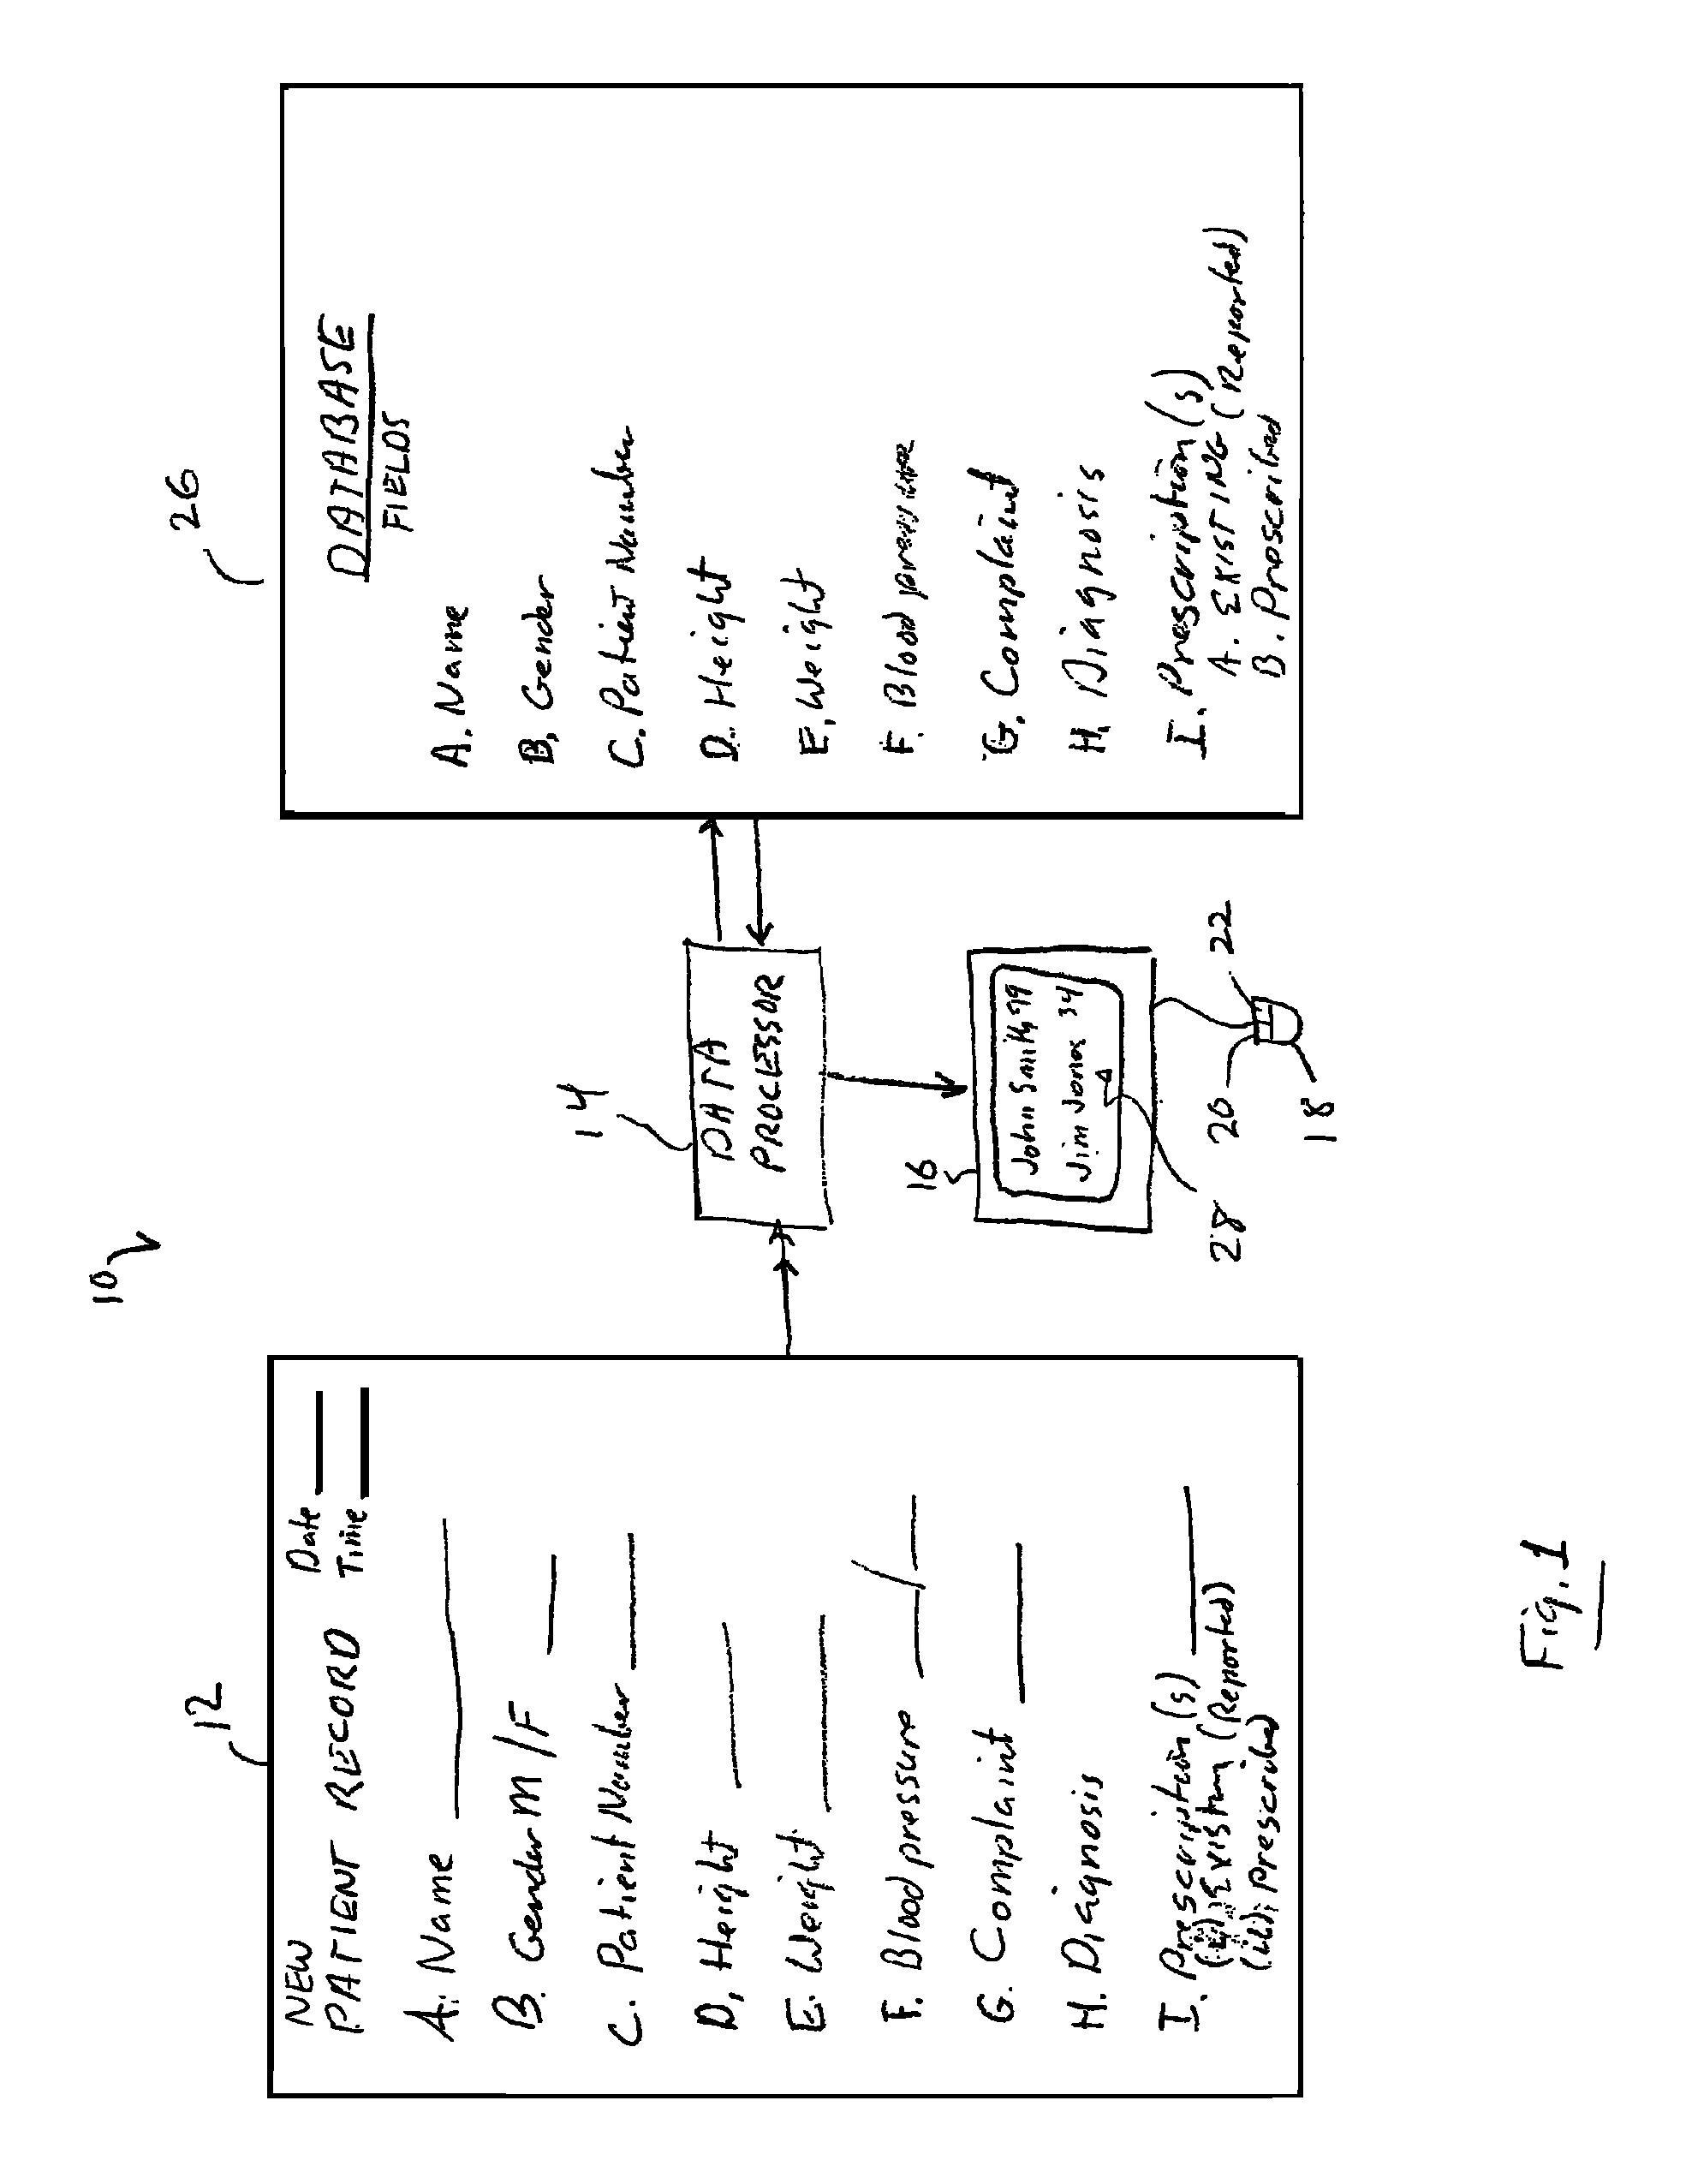 Association of data entries with patient records, customized hospital discharge instructions, and charting by exception for a computerized medical record system